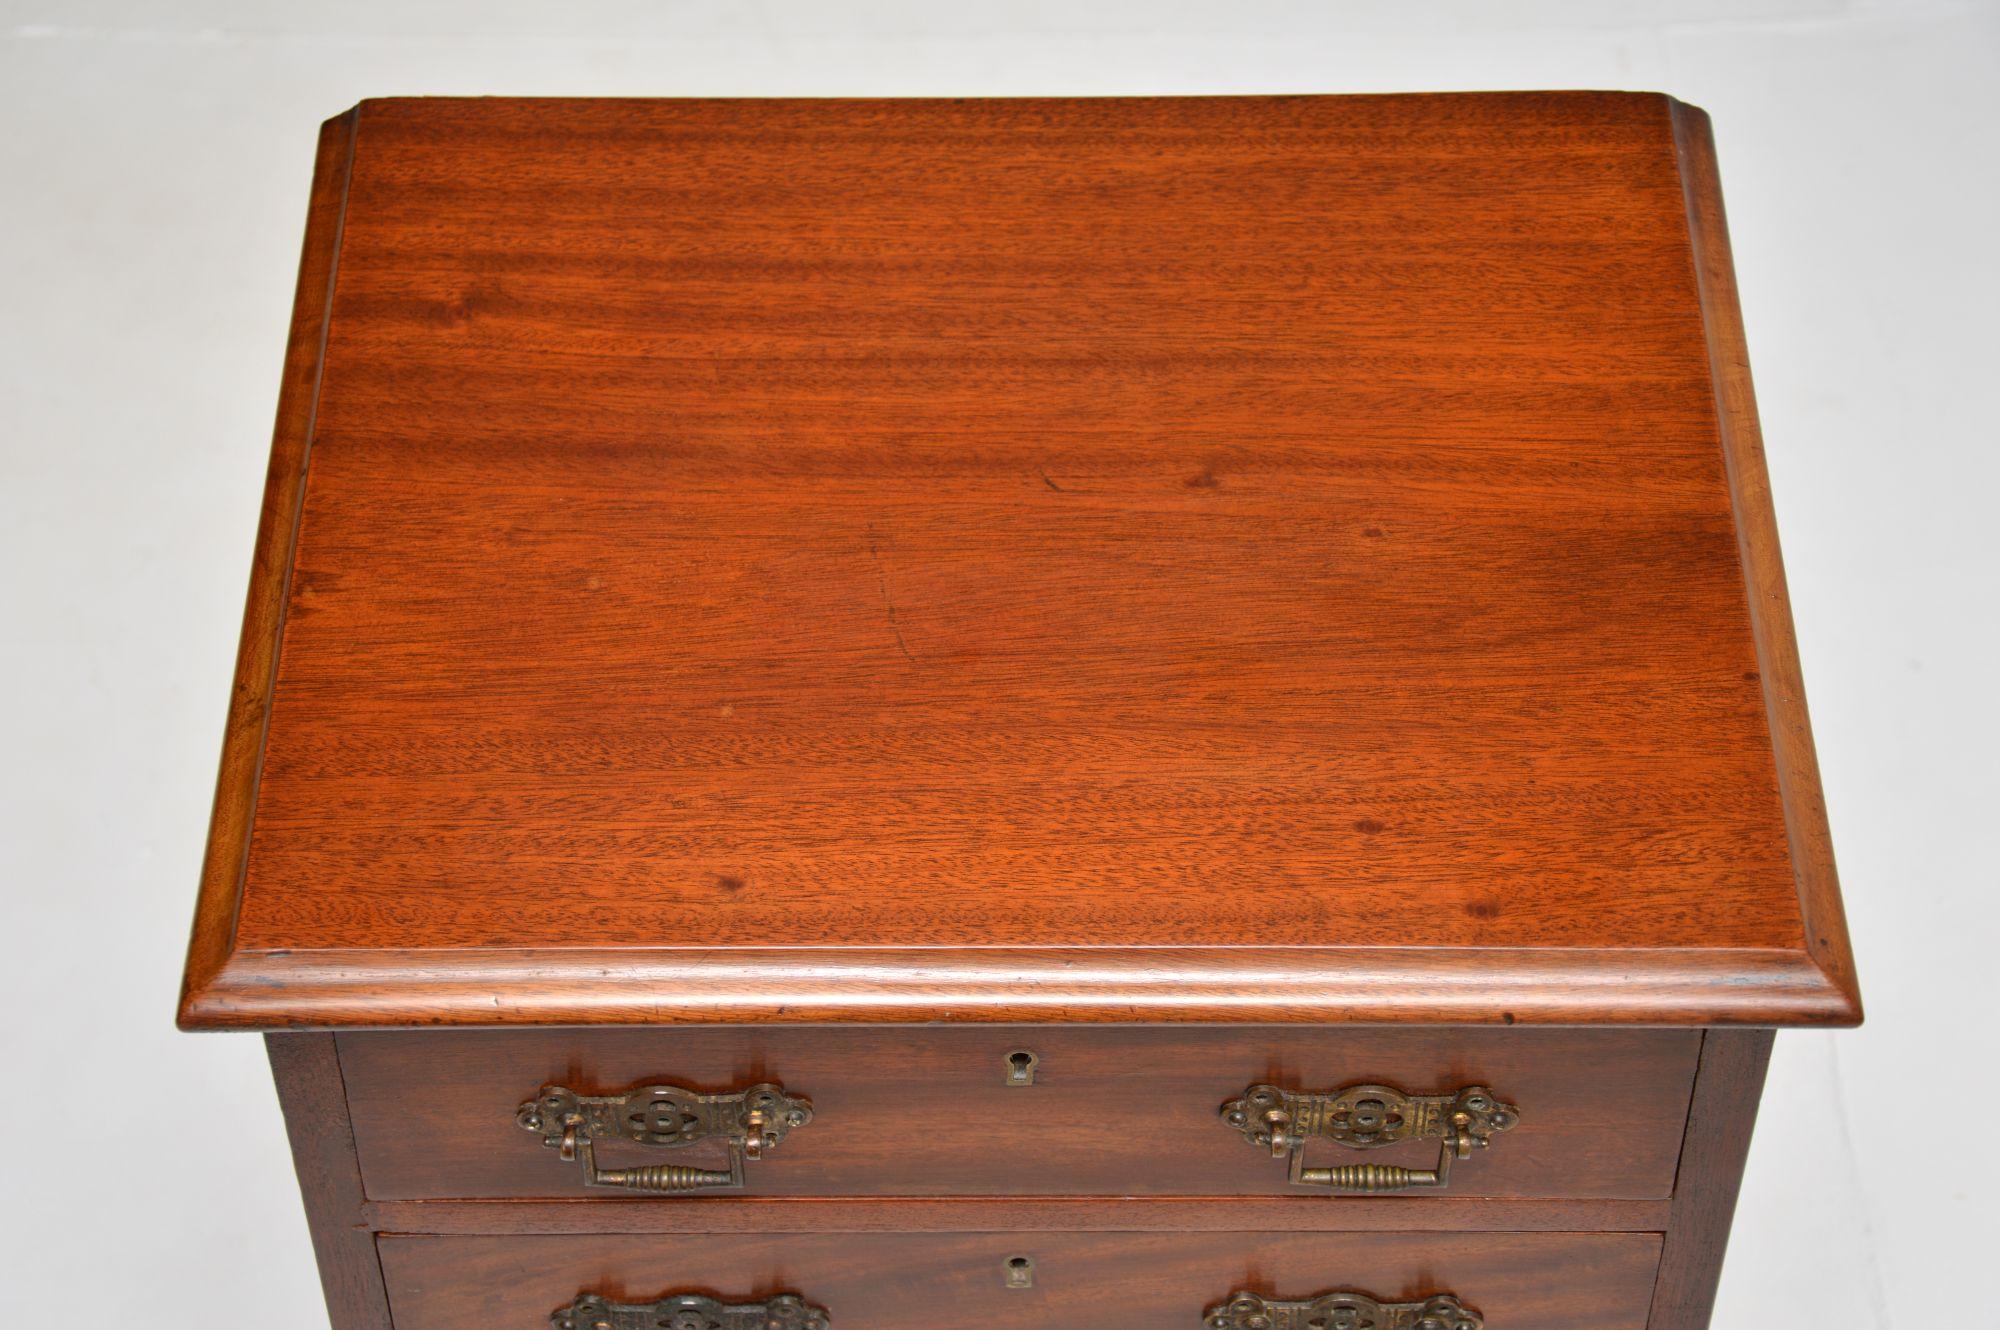 Antique Victorian Chest of Drawers 4